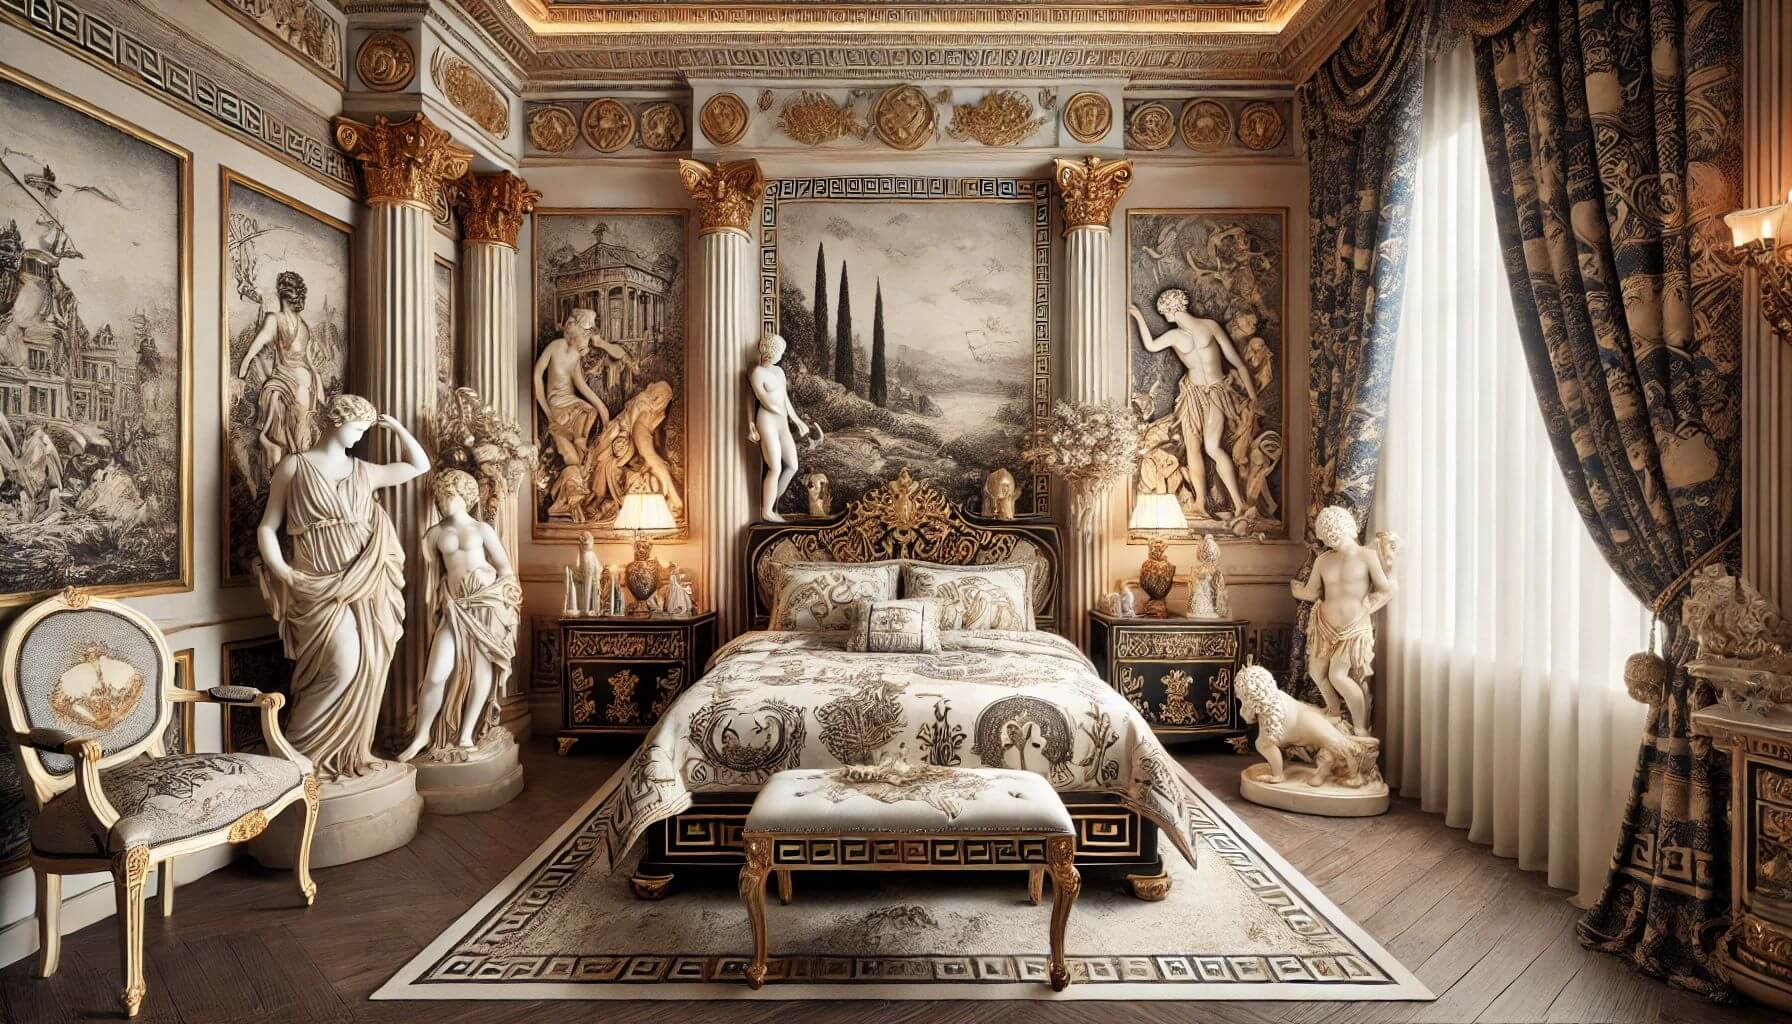 12 Ways to Incorporate Greek Mythology into Your Bedroom Decor